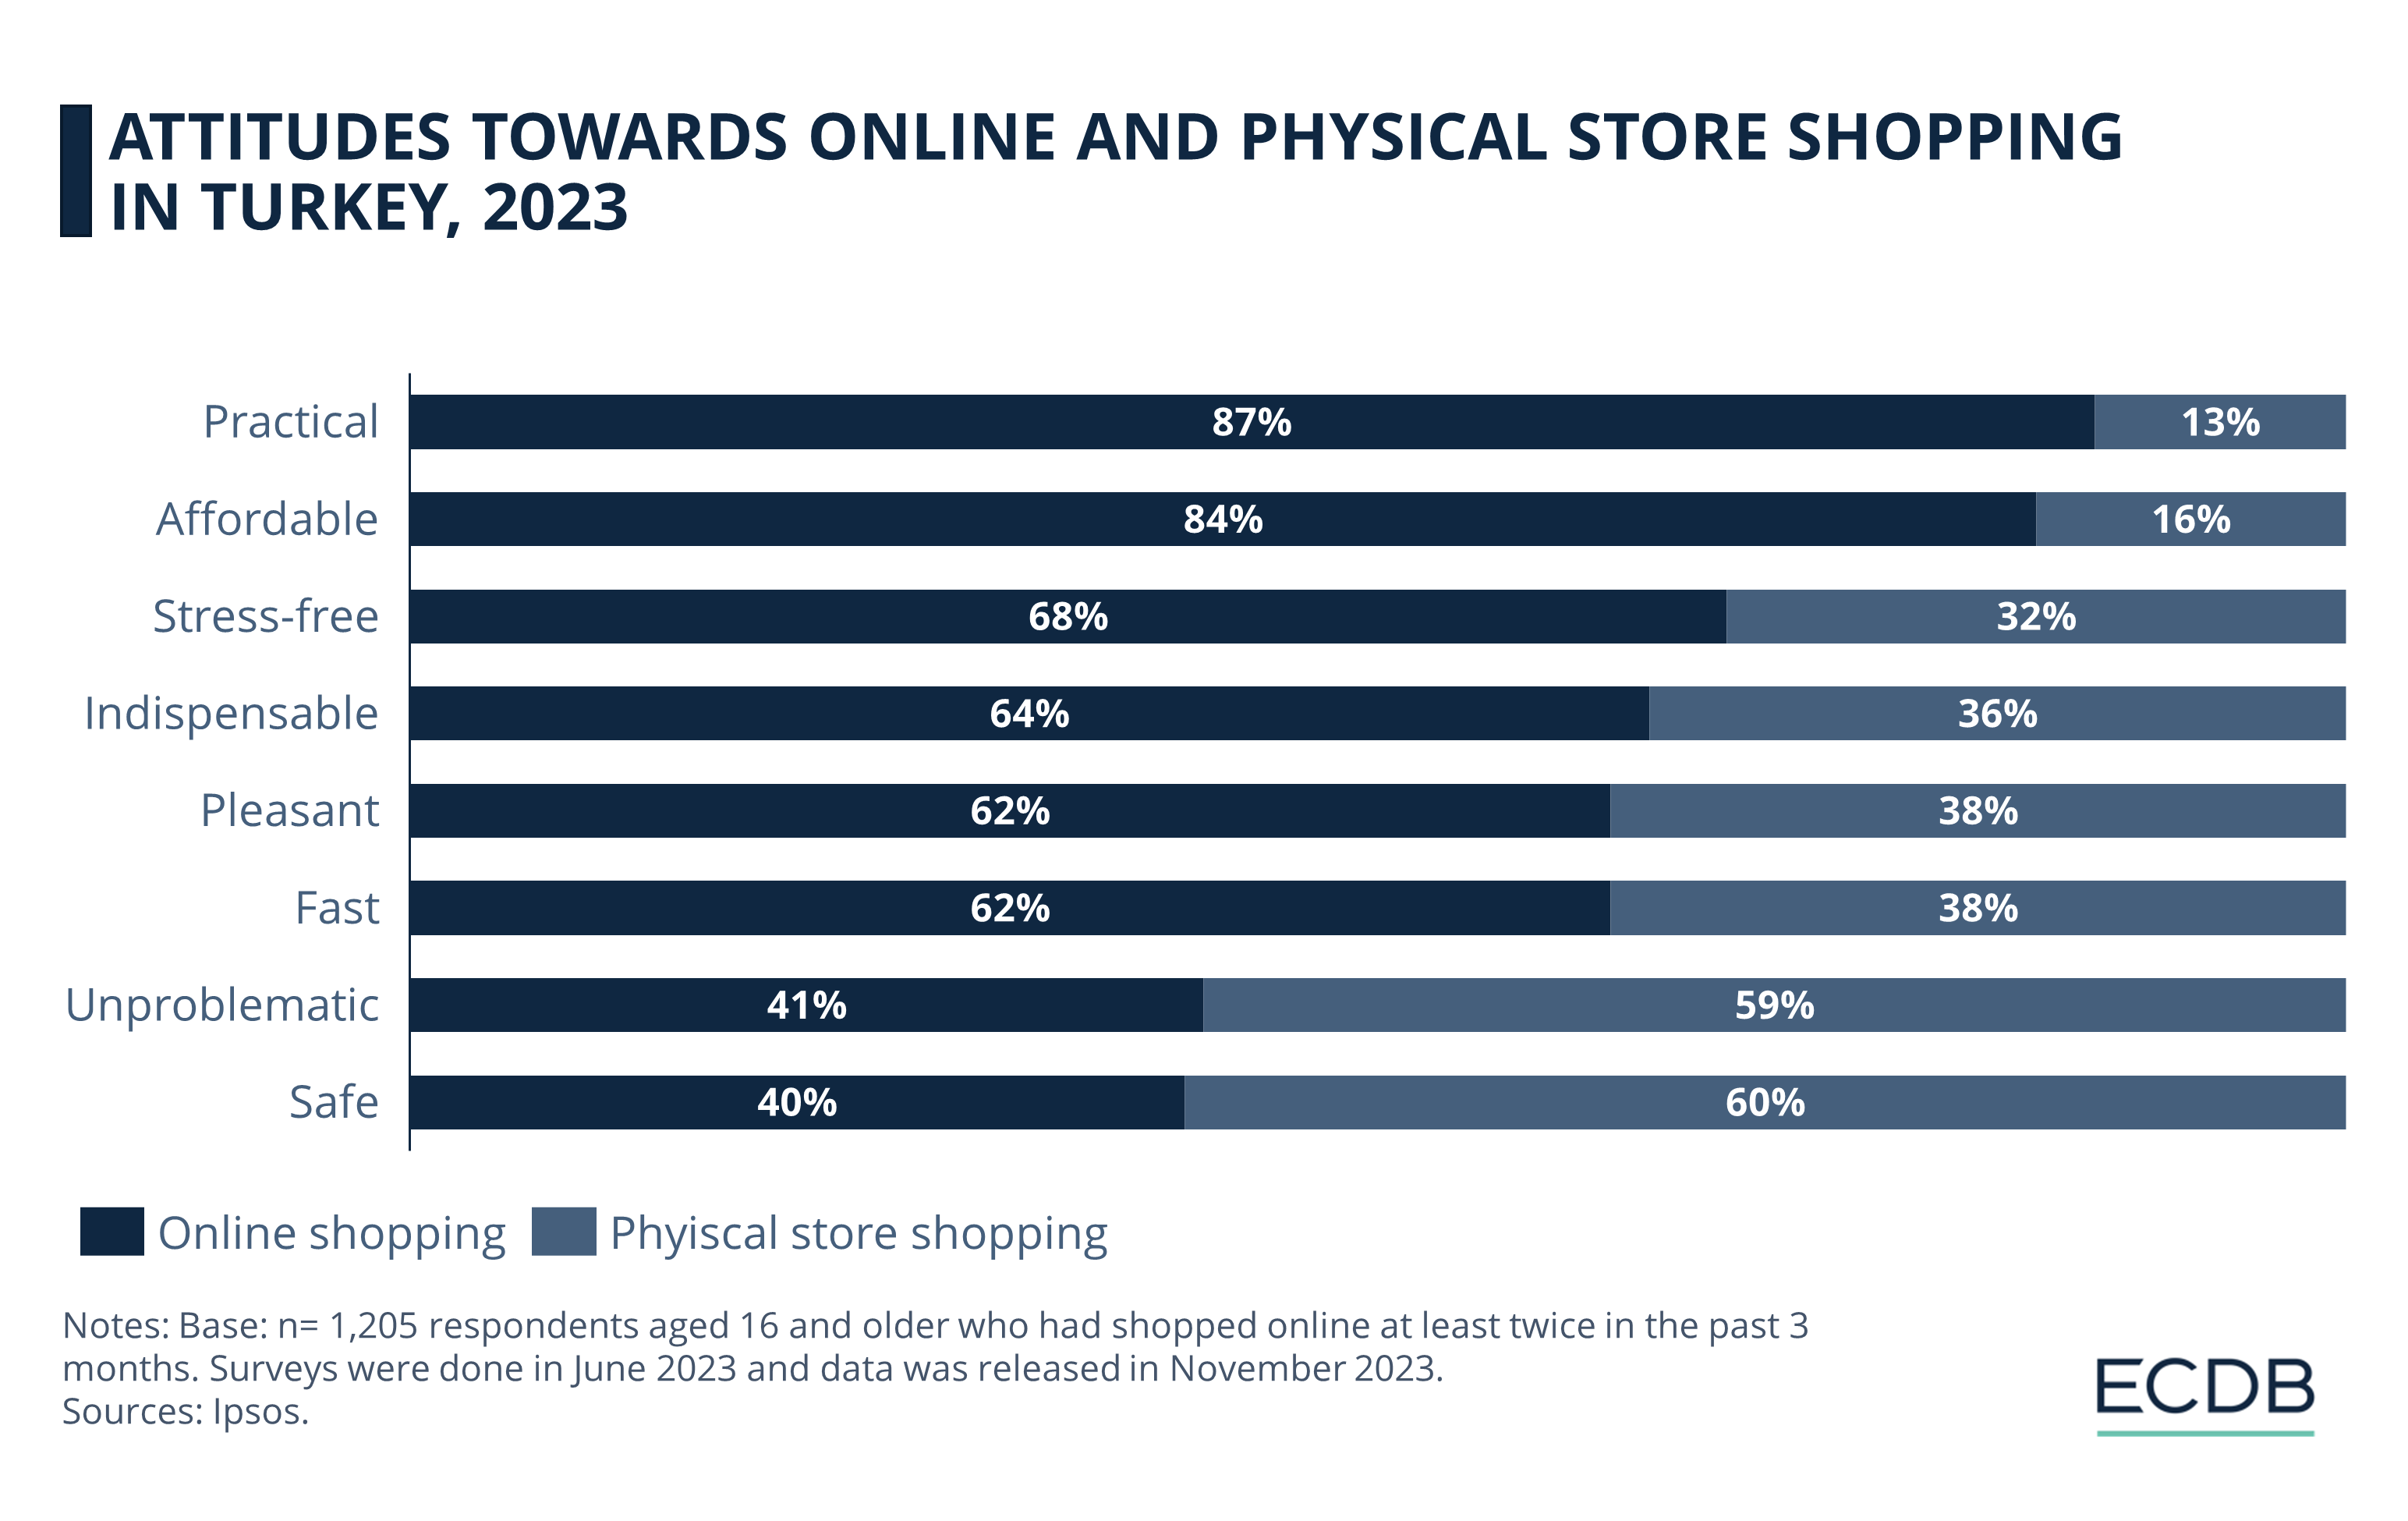 Attitudes Towards Online and Physical Store Shopping in Turkey, 2023